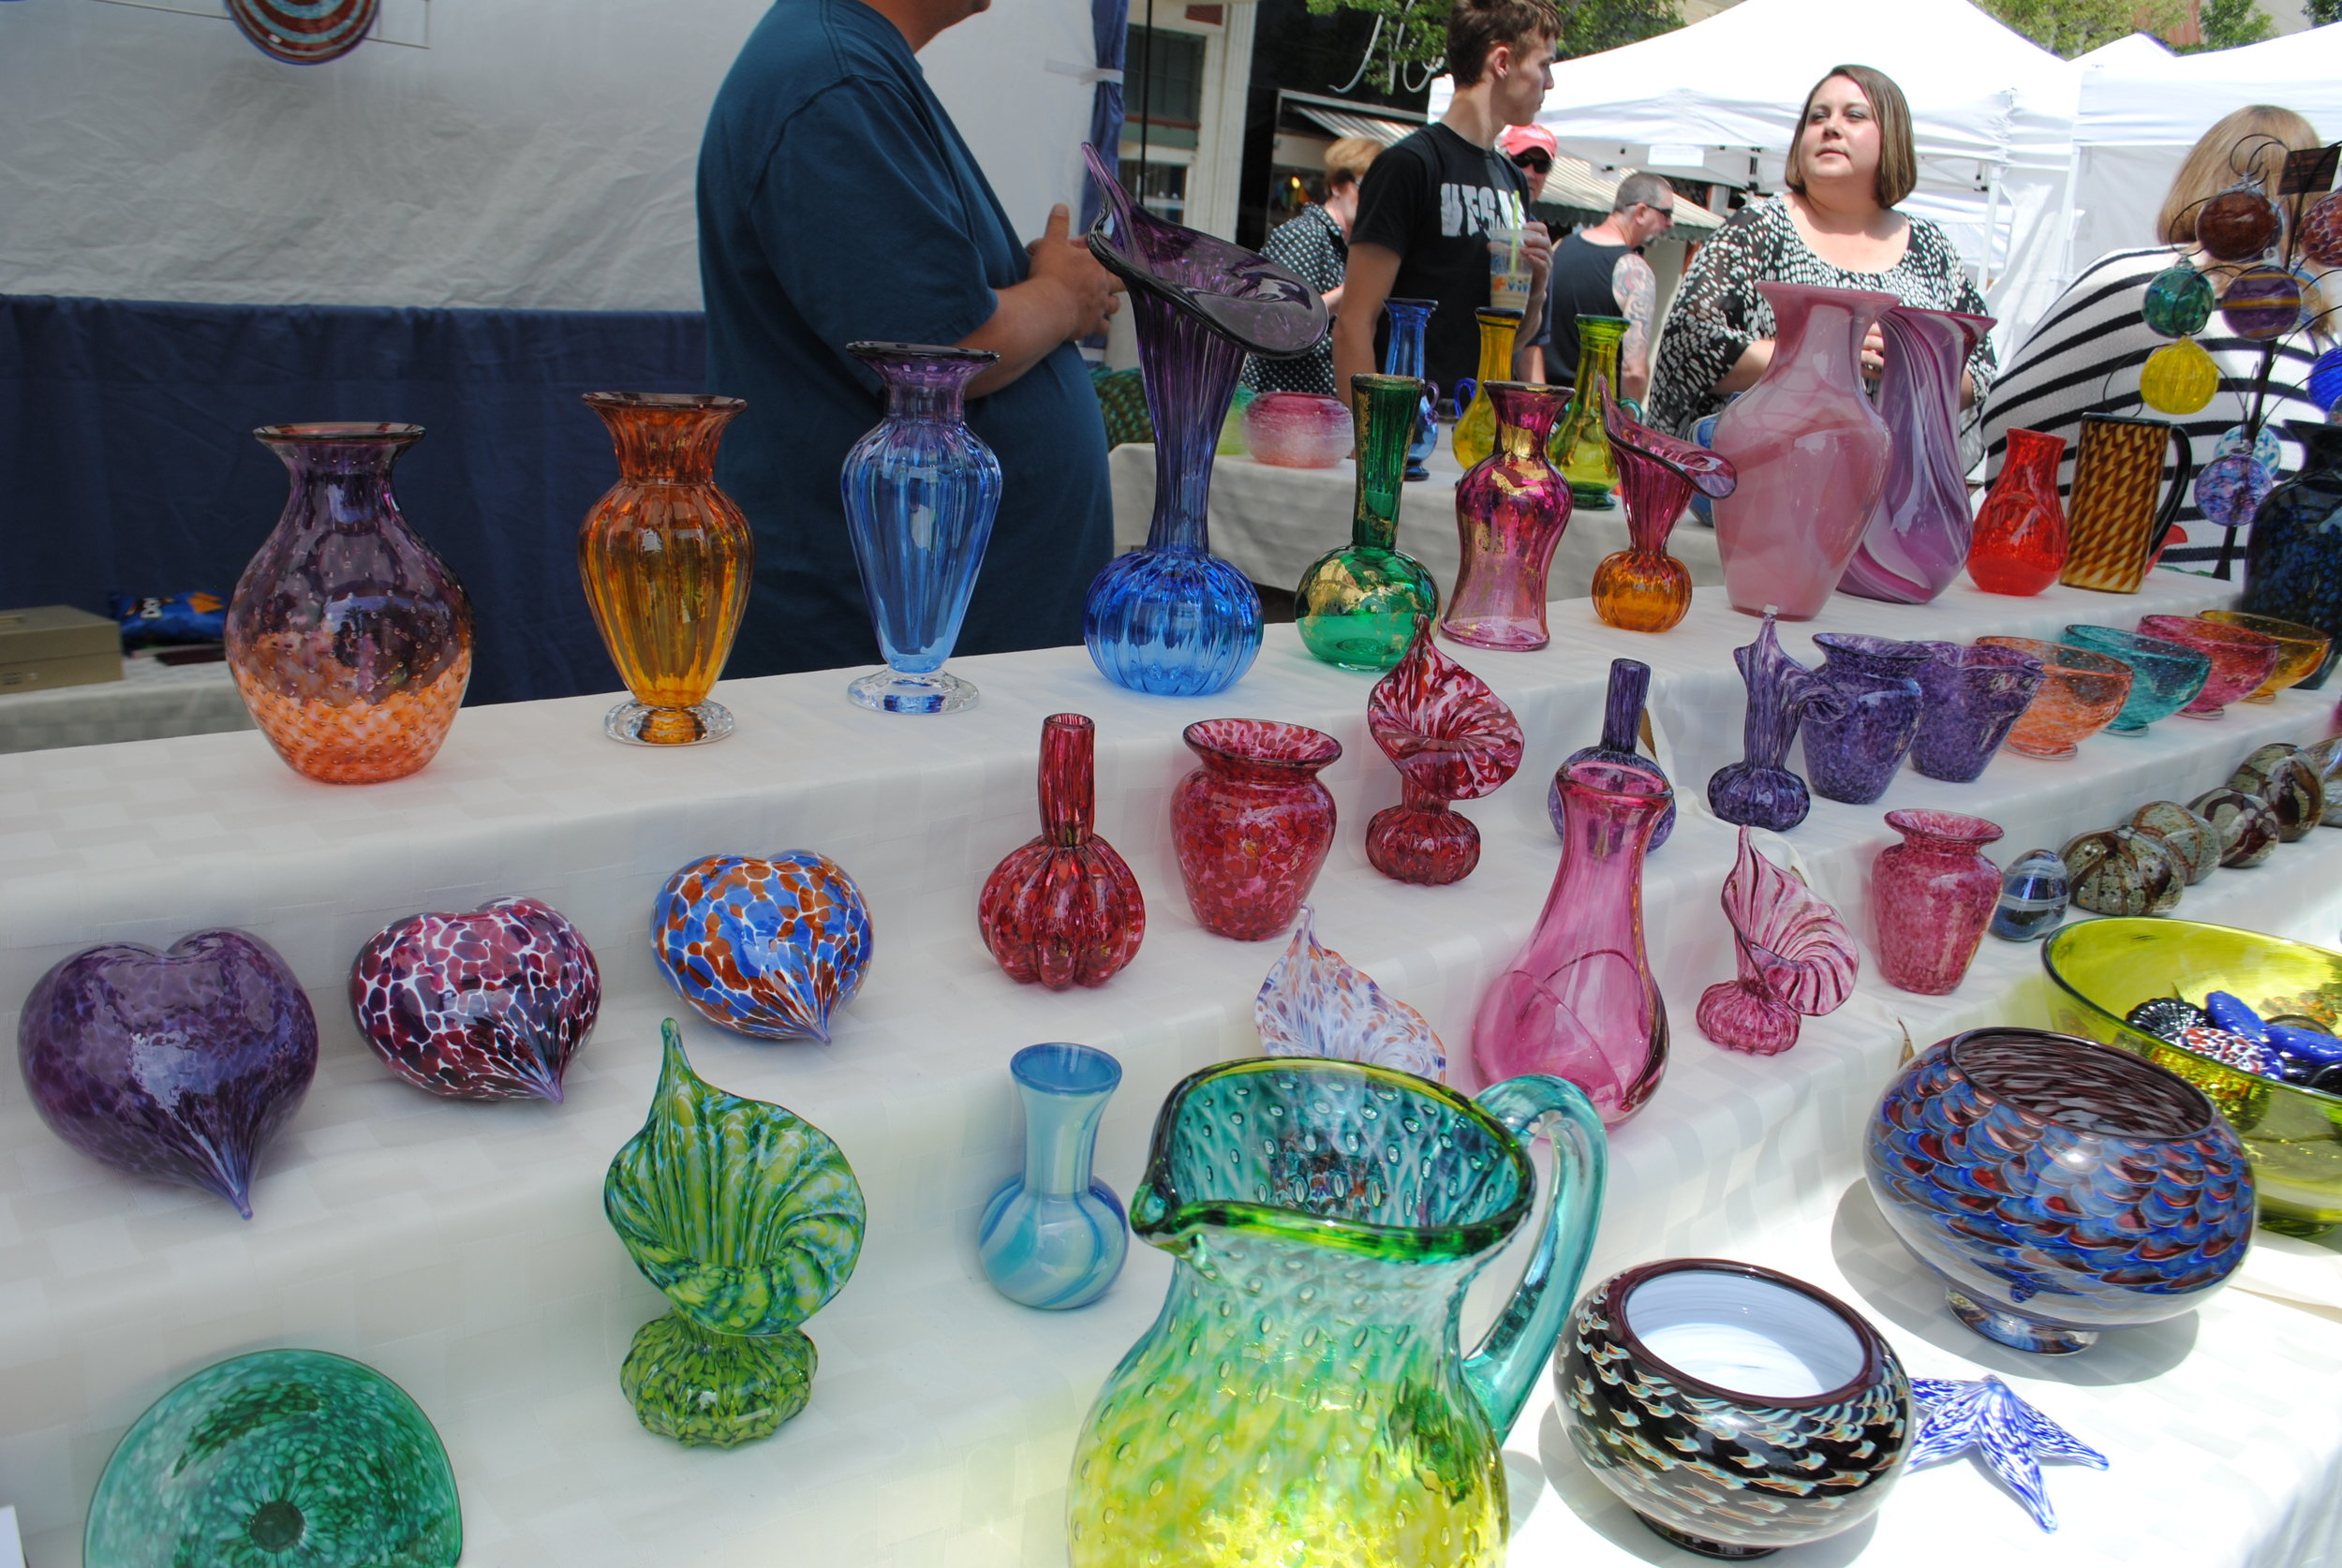 MEDFORD ART IN BLOOM - What to do in Southern Oregon - Things to do - Events - Mother's Day